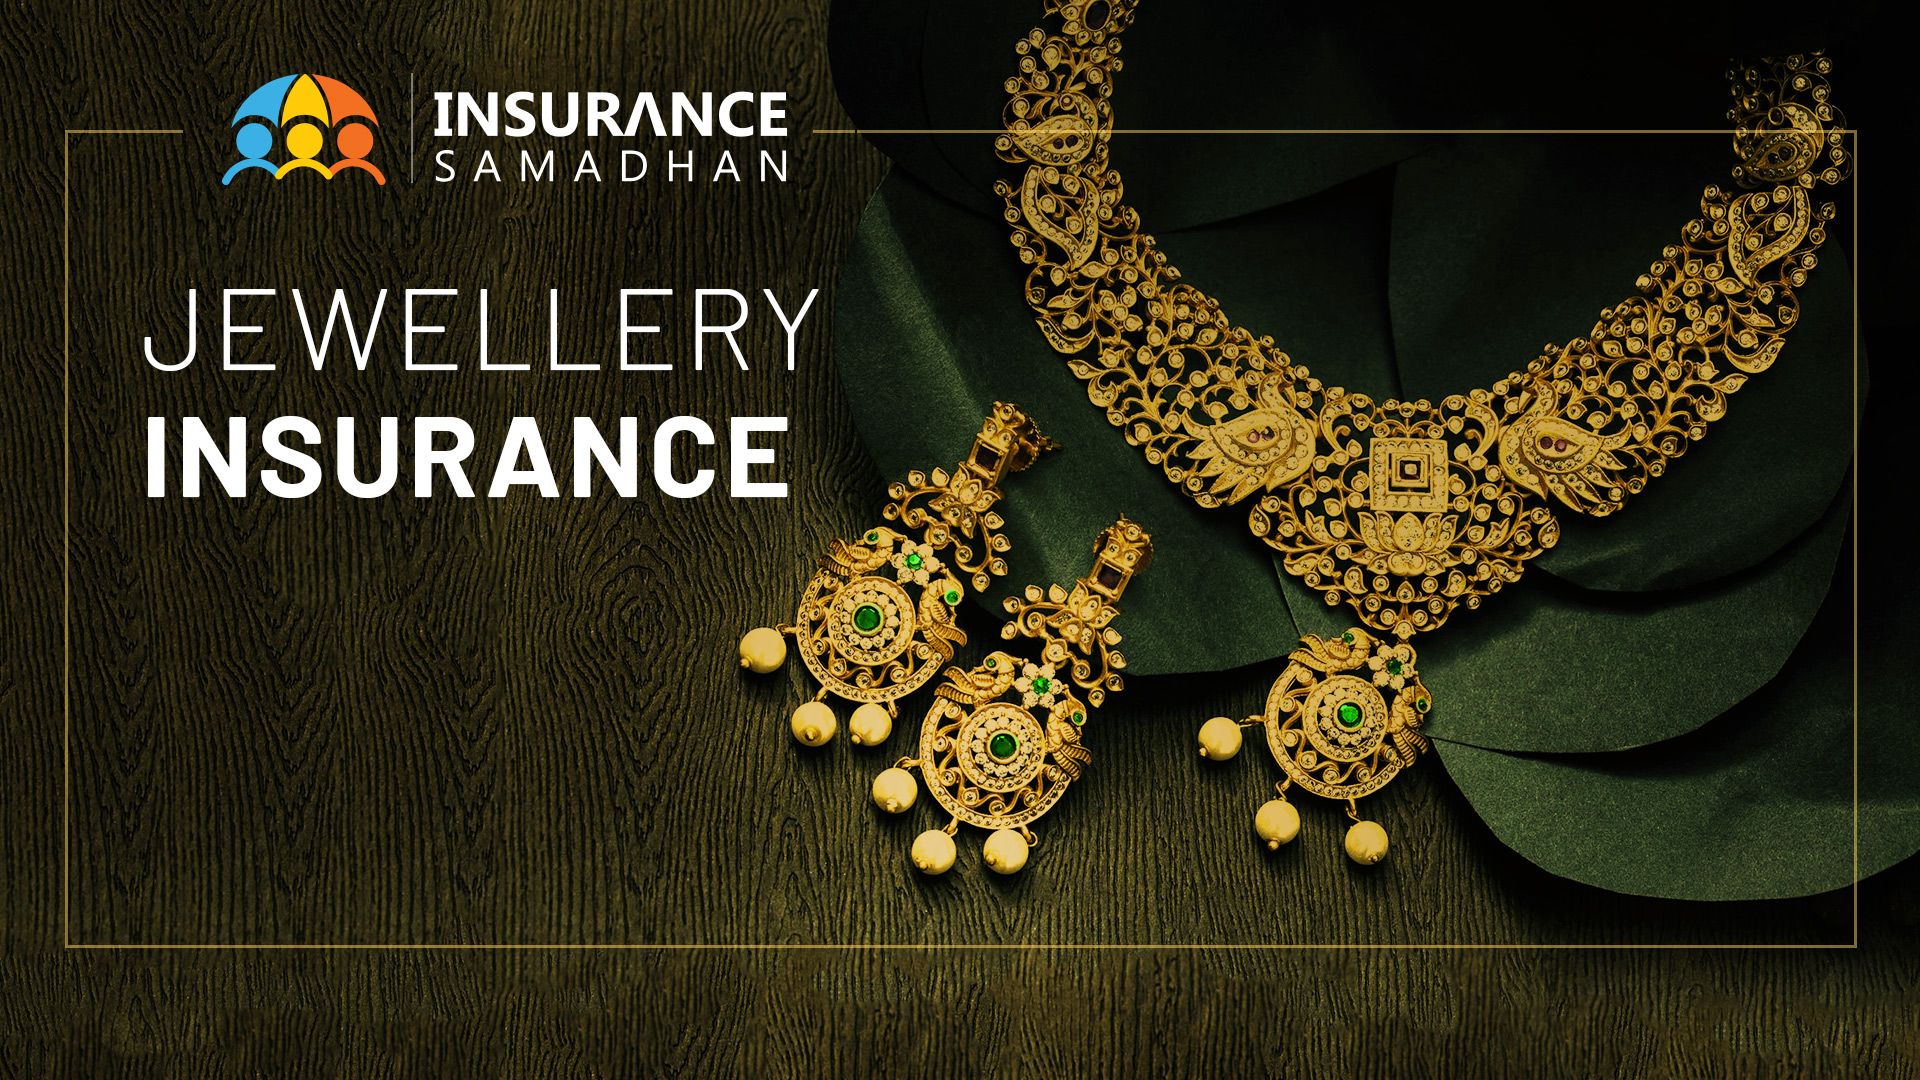 Jewellery Insurance Know Jewellery Block Insurance Process amp Features